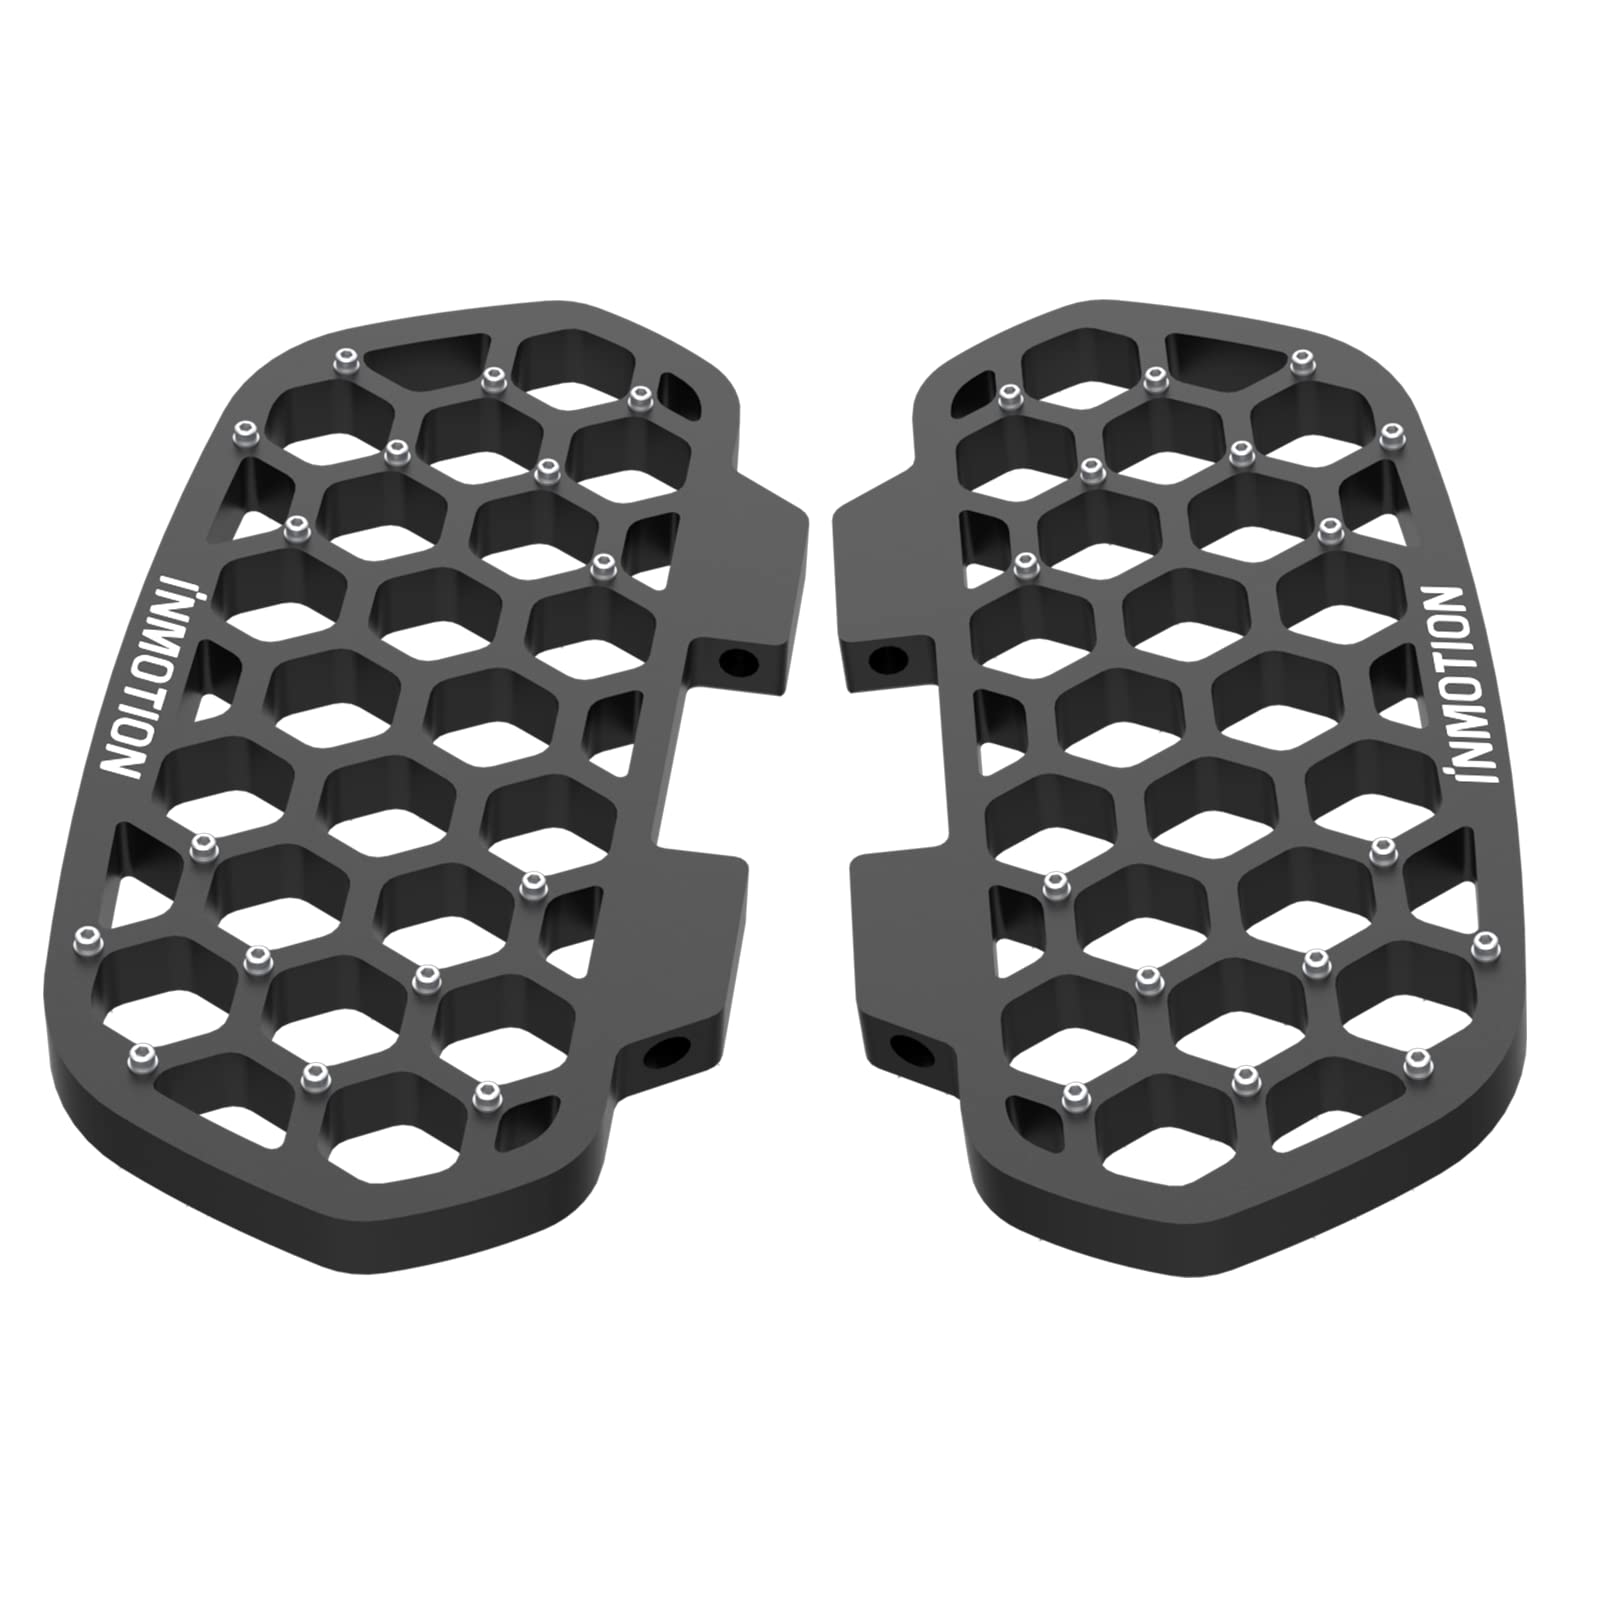 Inmotion V11 V12 Honeycomb Foot Pedals Electric Unicycles Accessories Spiked Non-Slip Off-Road Pedals with Magnet High-Densi